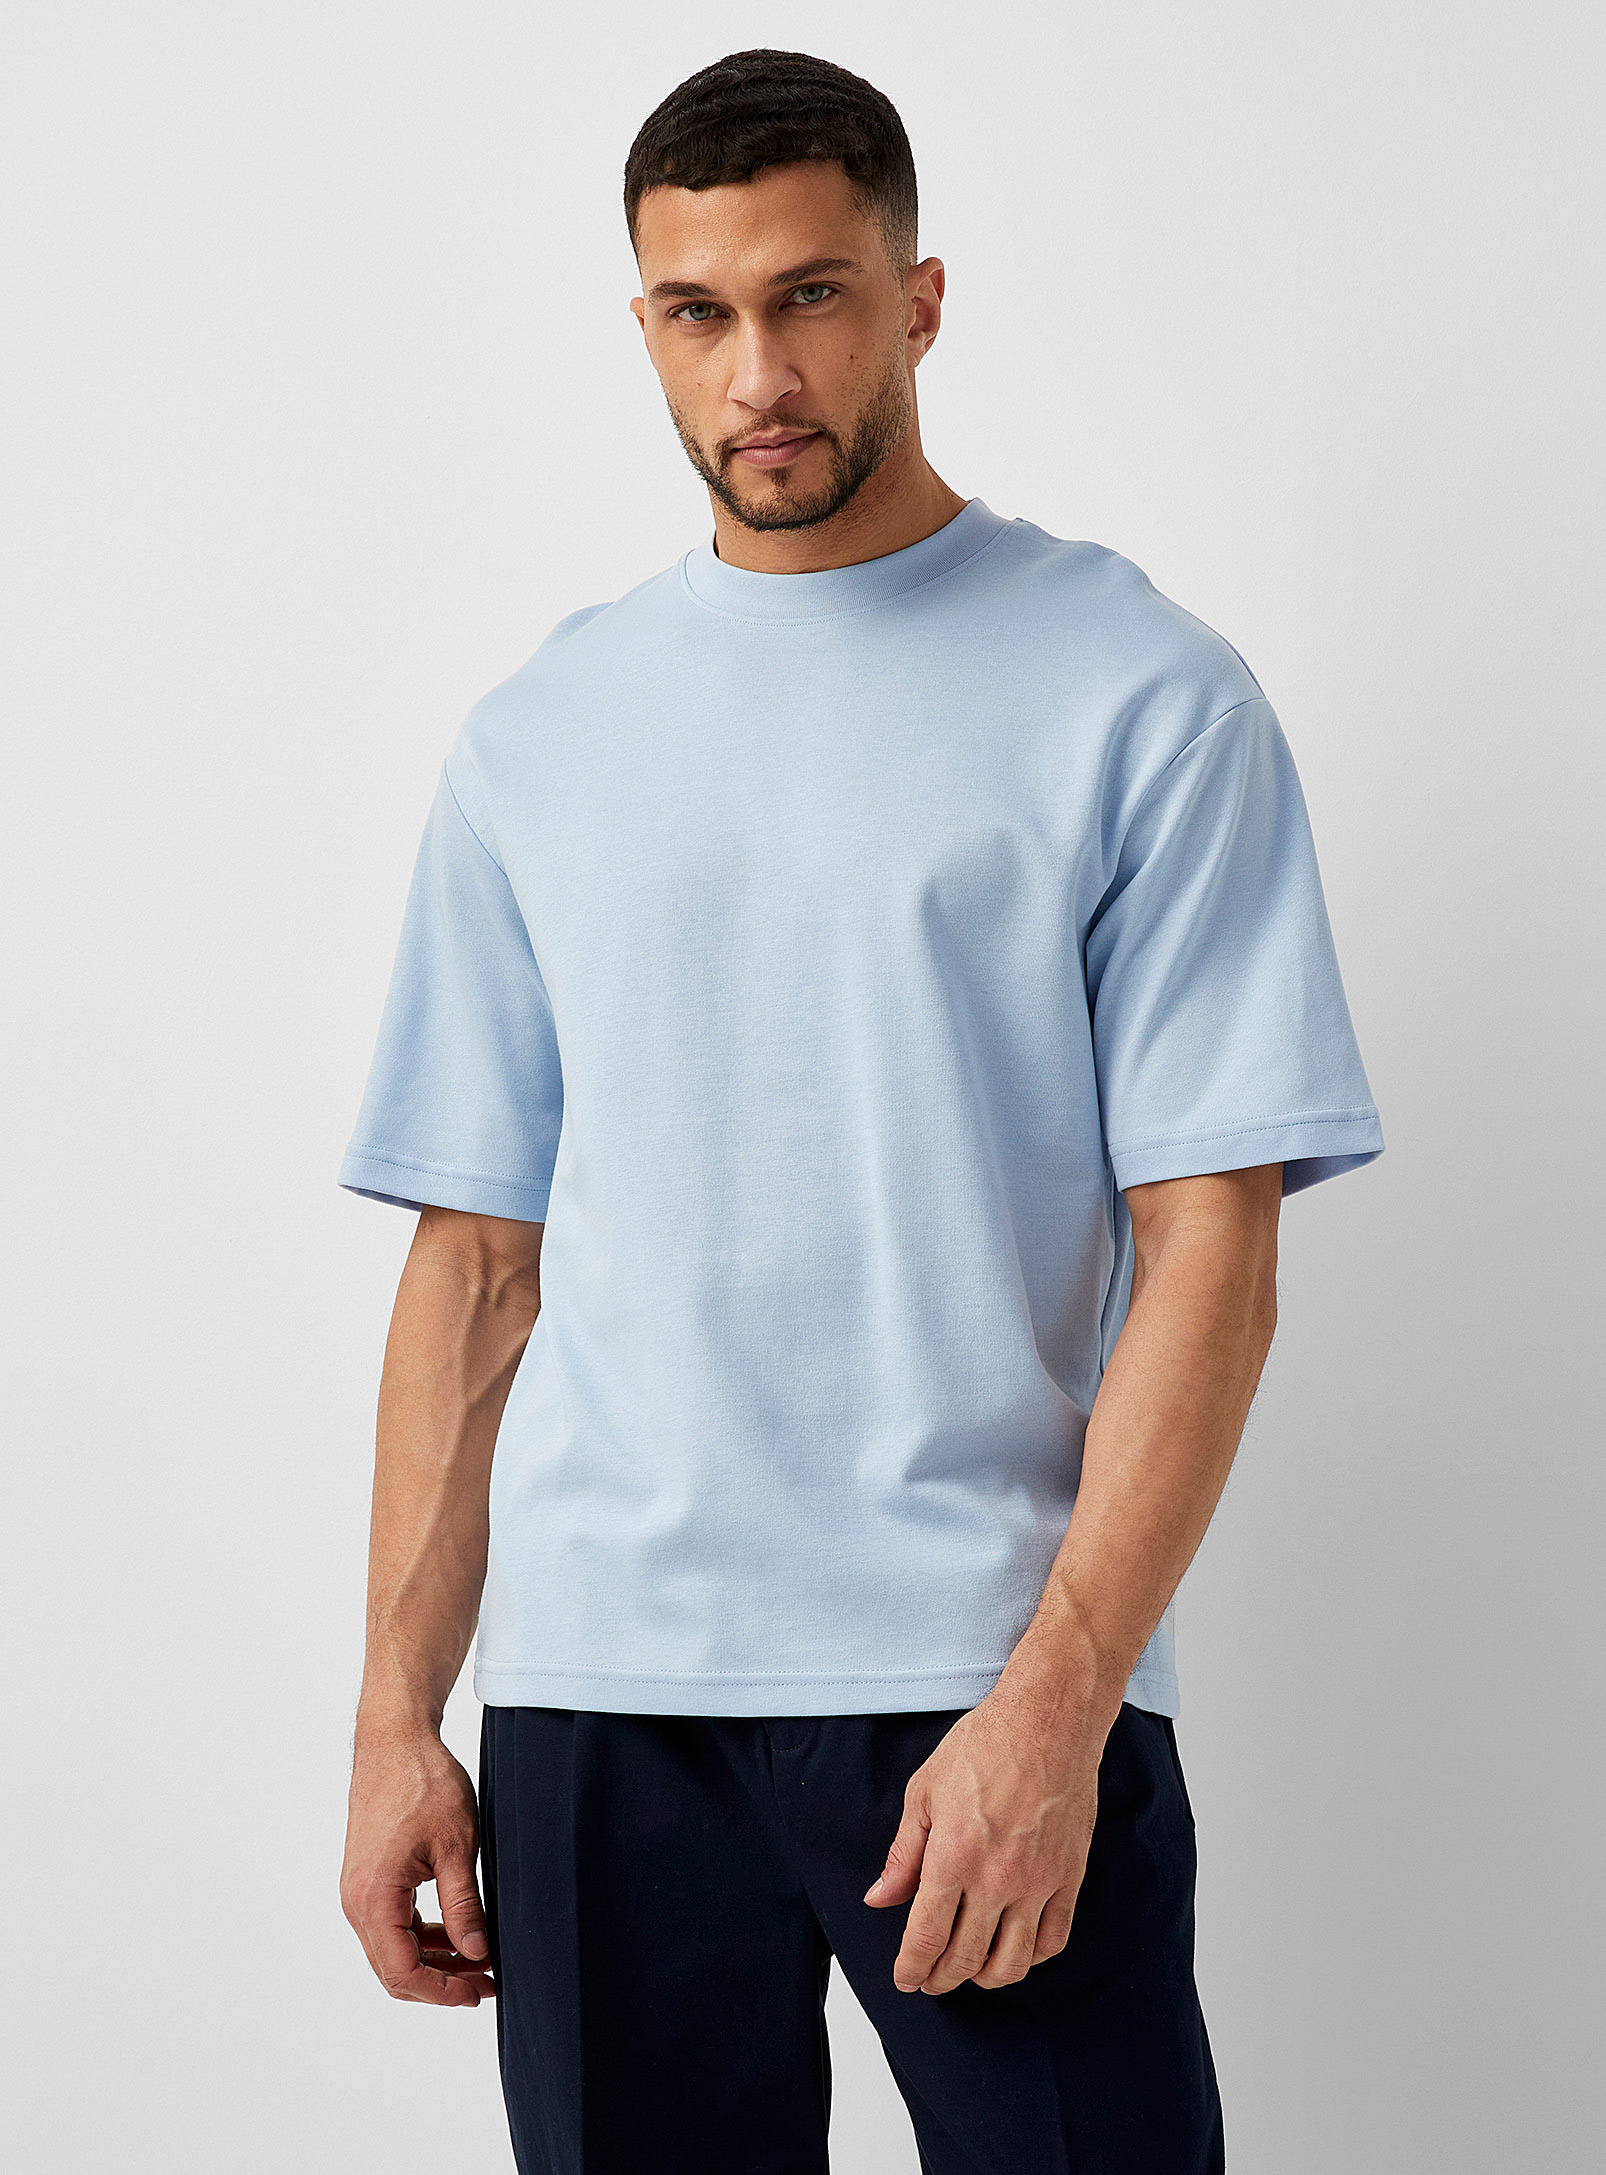 Selected Minimalist T-shirt In Baby Blue